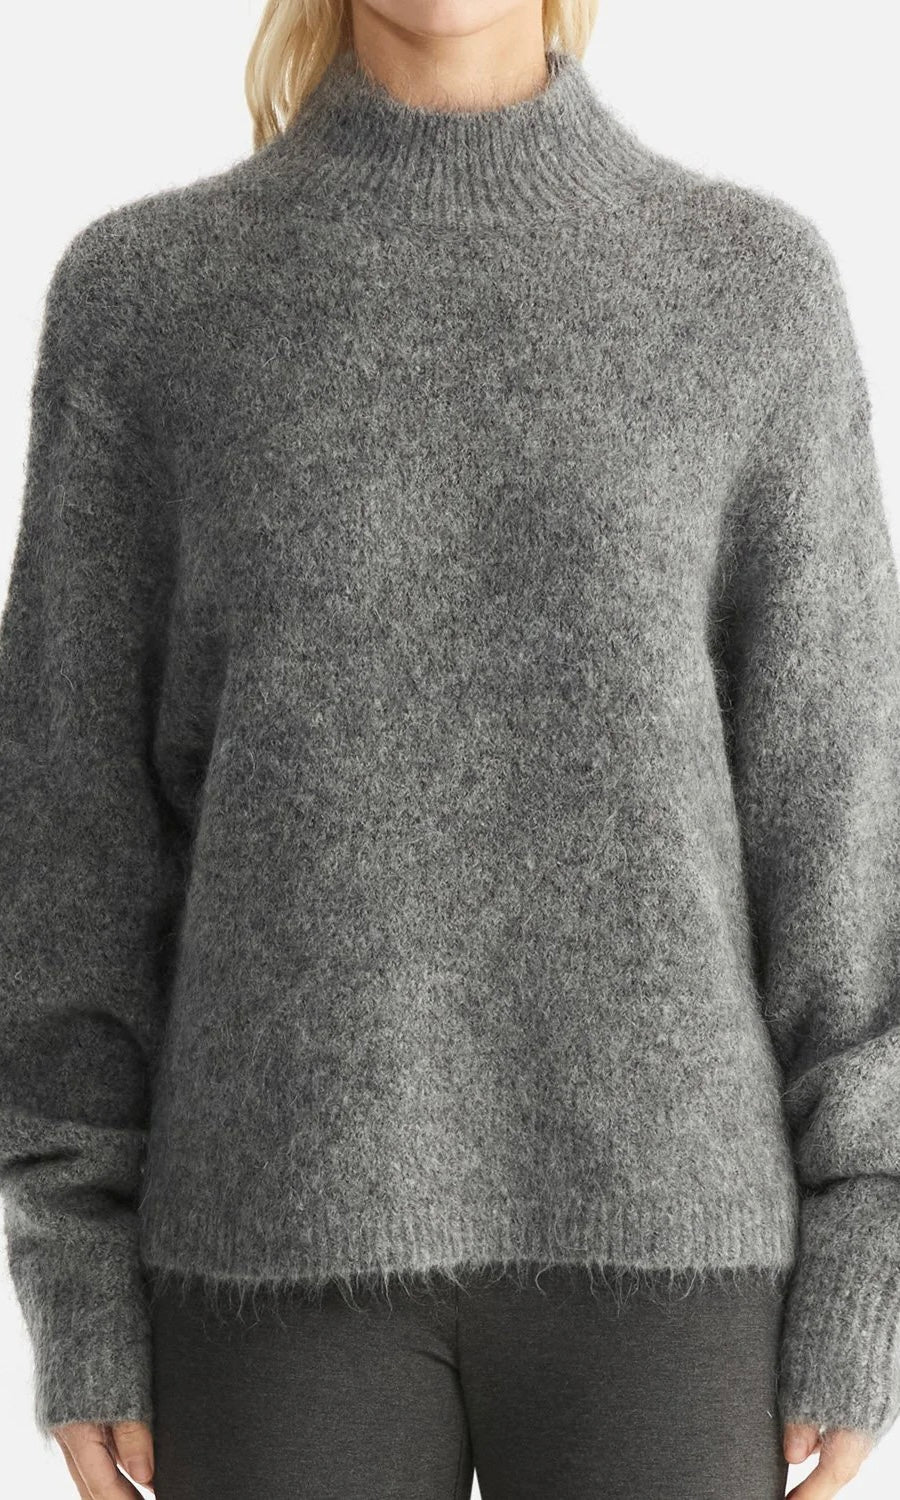 Ena Pelly Nicola Mohair Knit In Charcoal